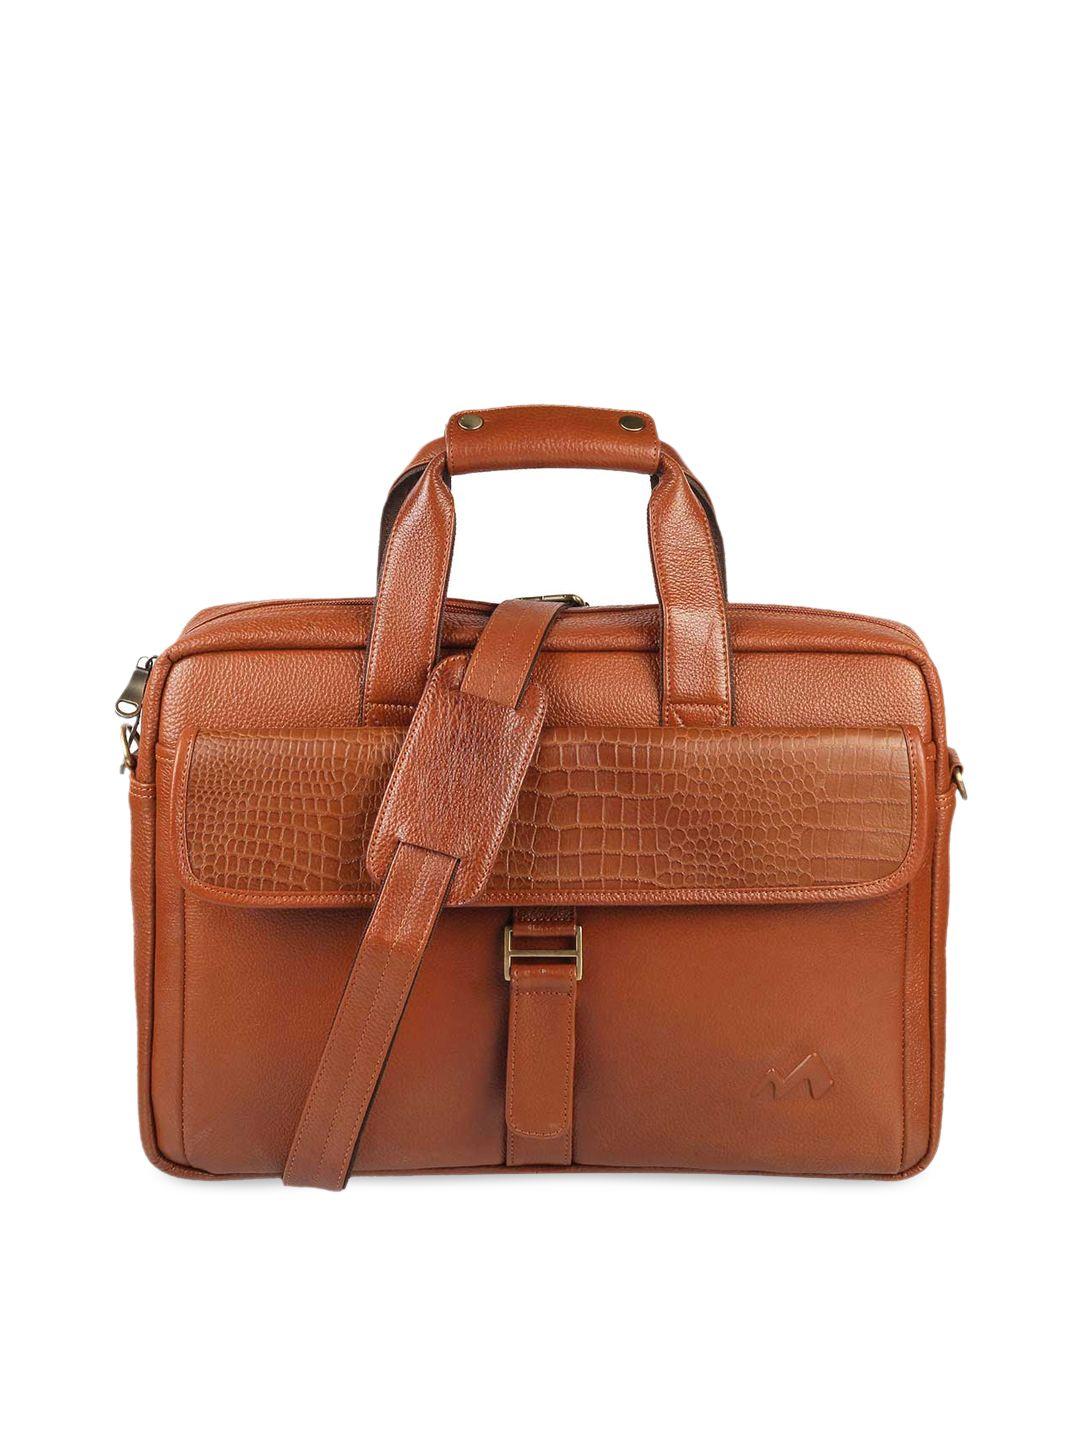 metro tan textured leather structured handheld bag with cut work